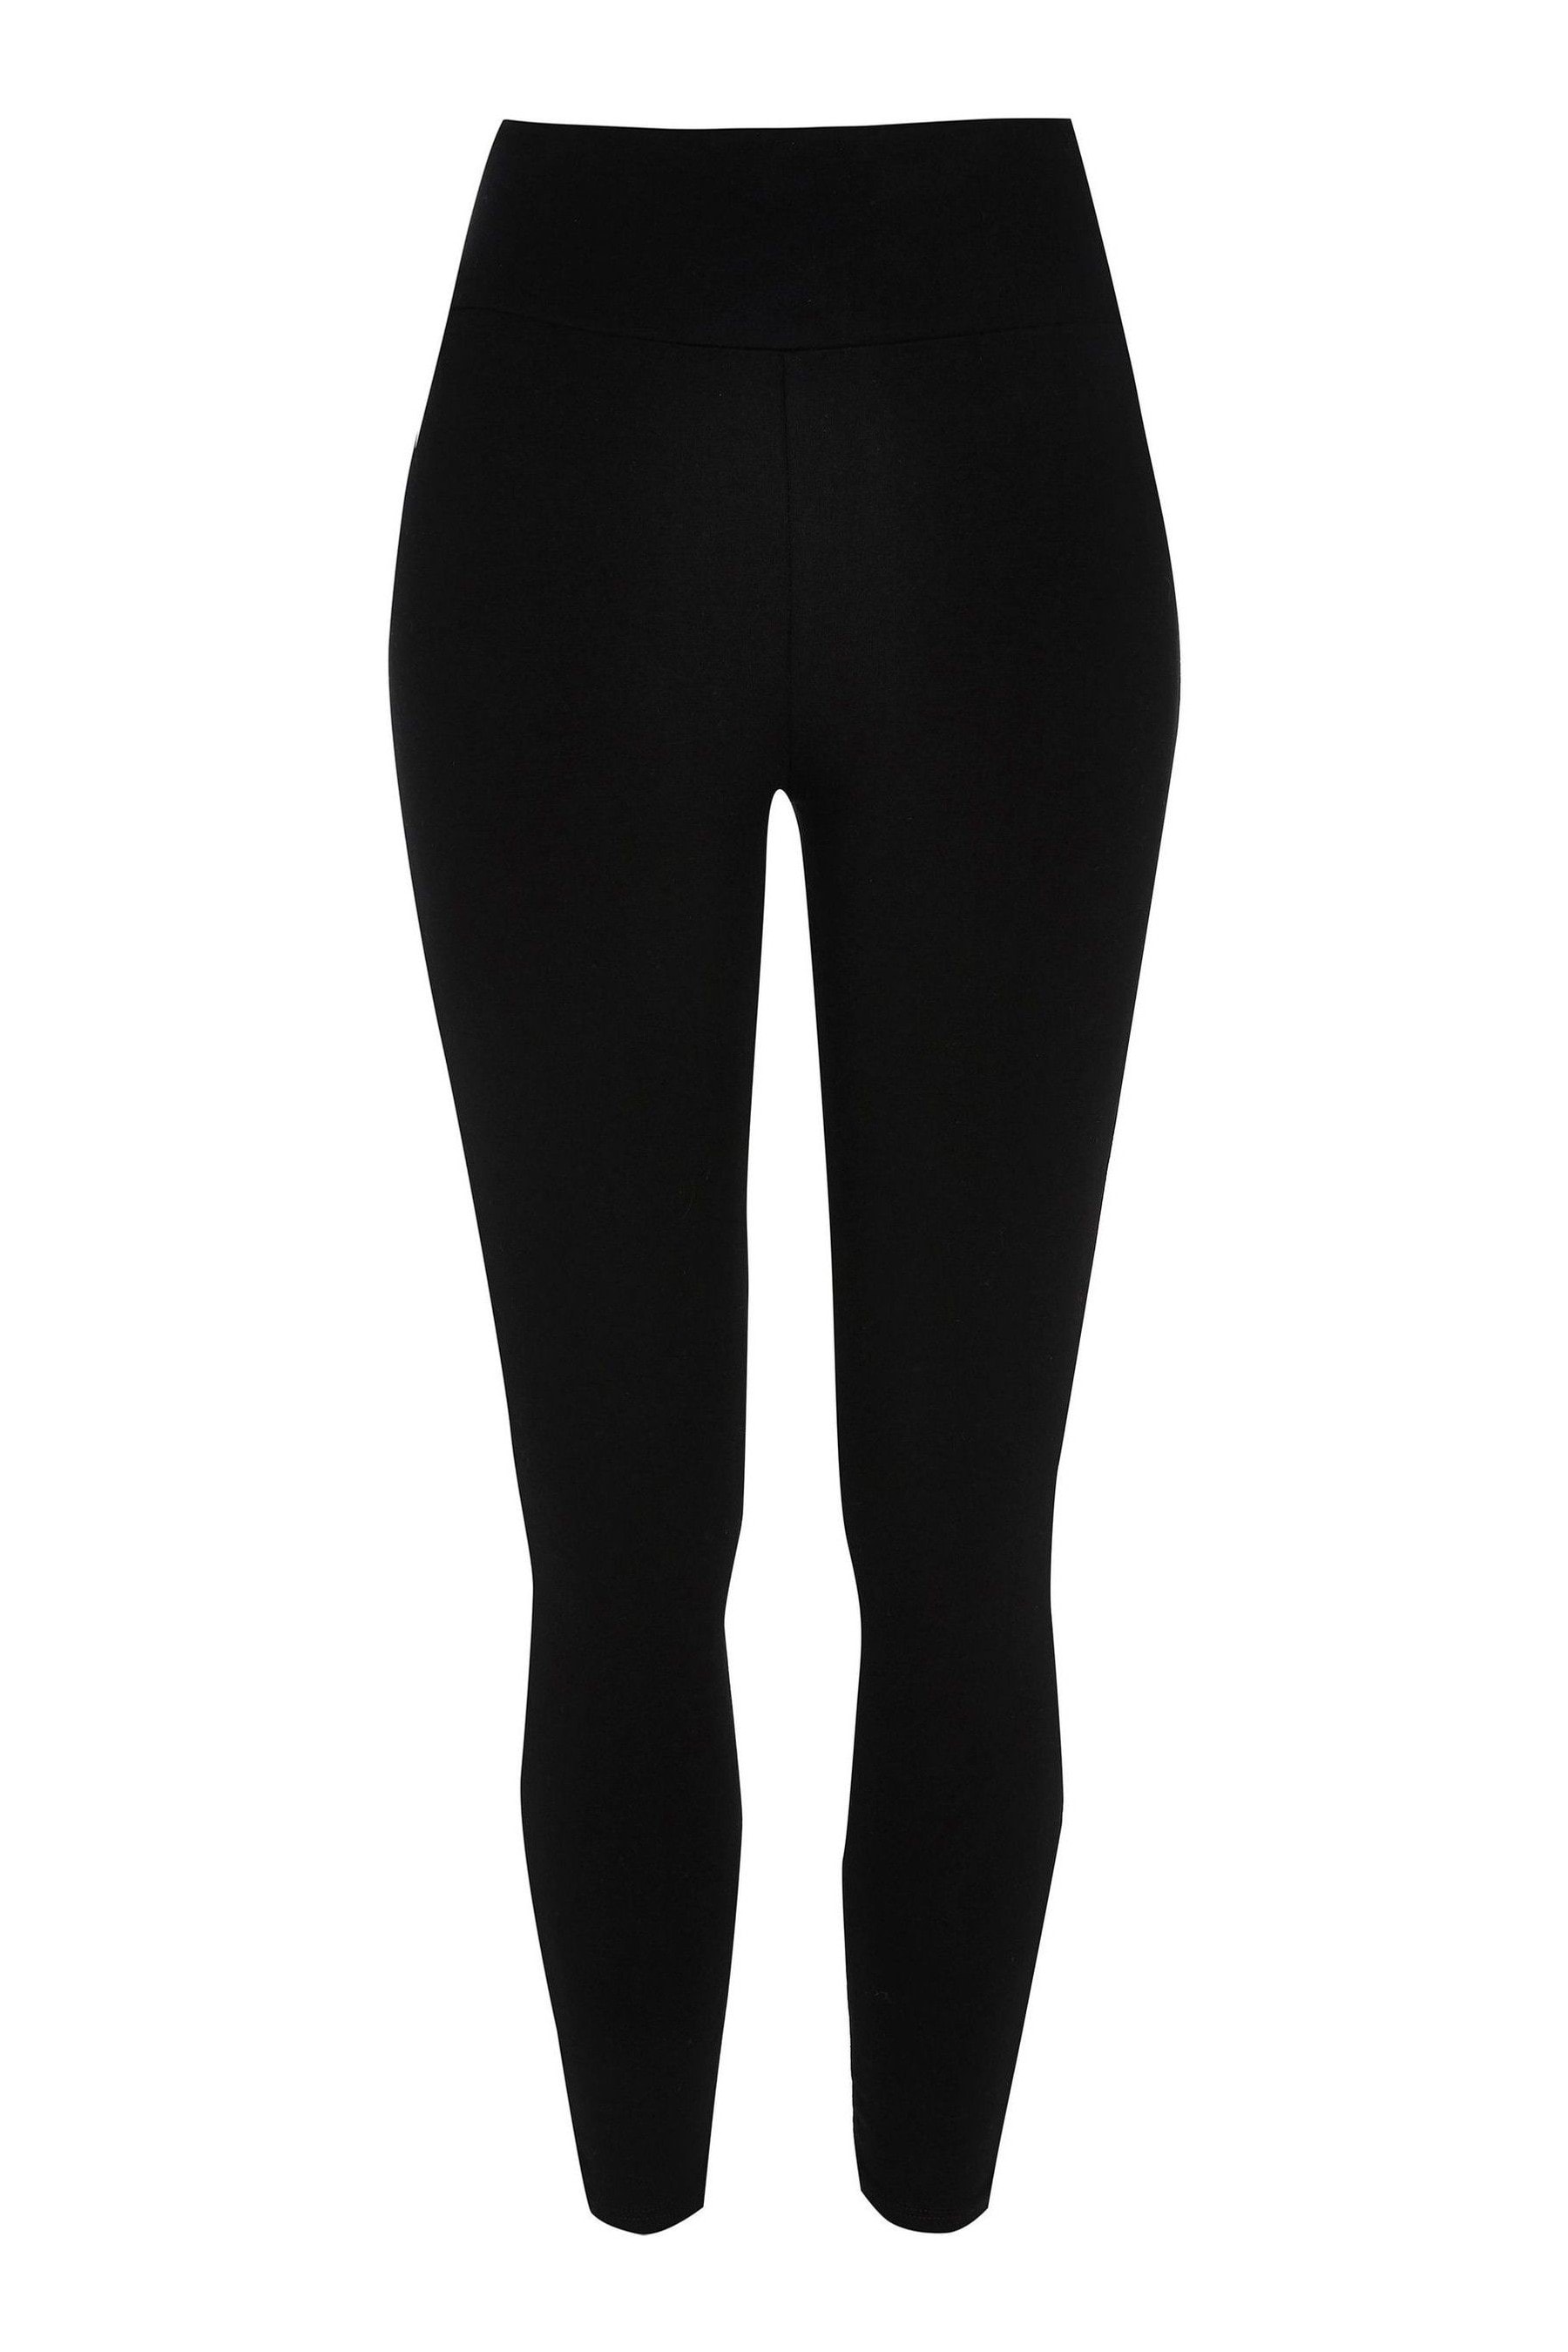 Shop Our Women's Leggings and Joggers Online